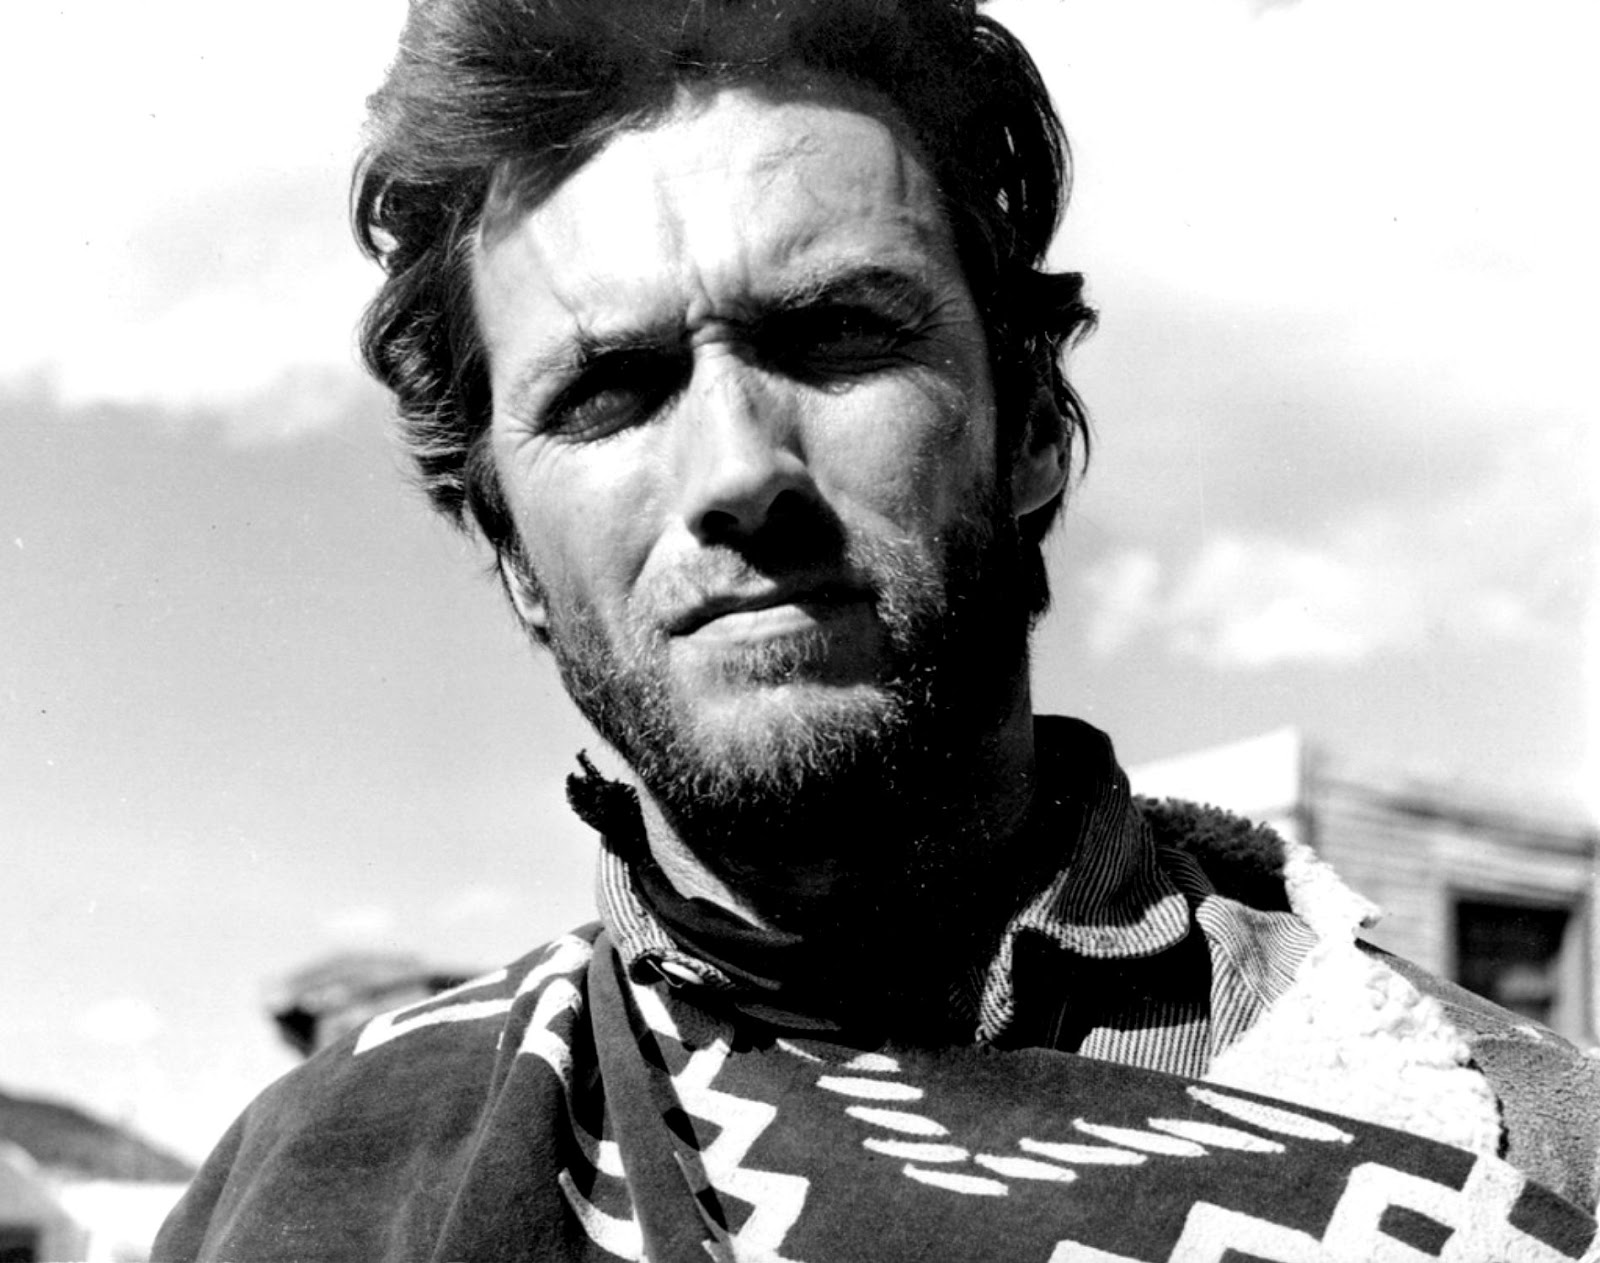 The Clint Eastwood Archive October 2017 Clint Eastwood Clint.